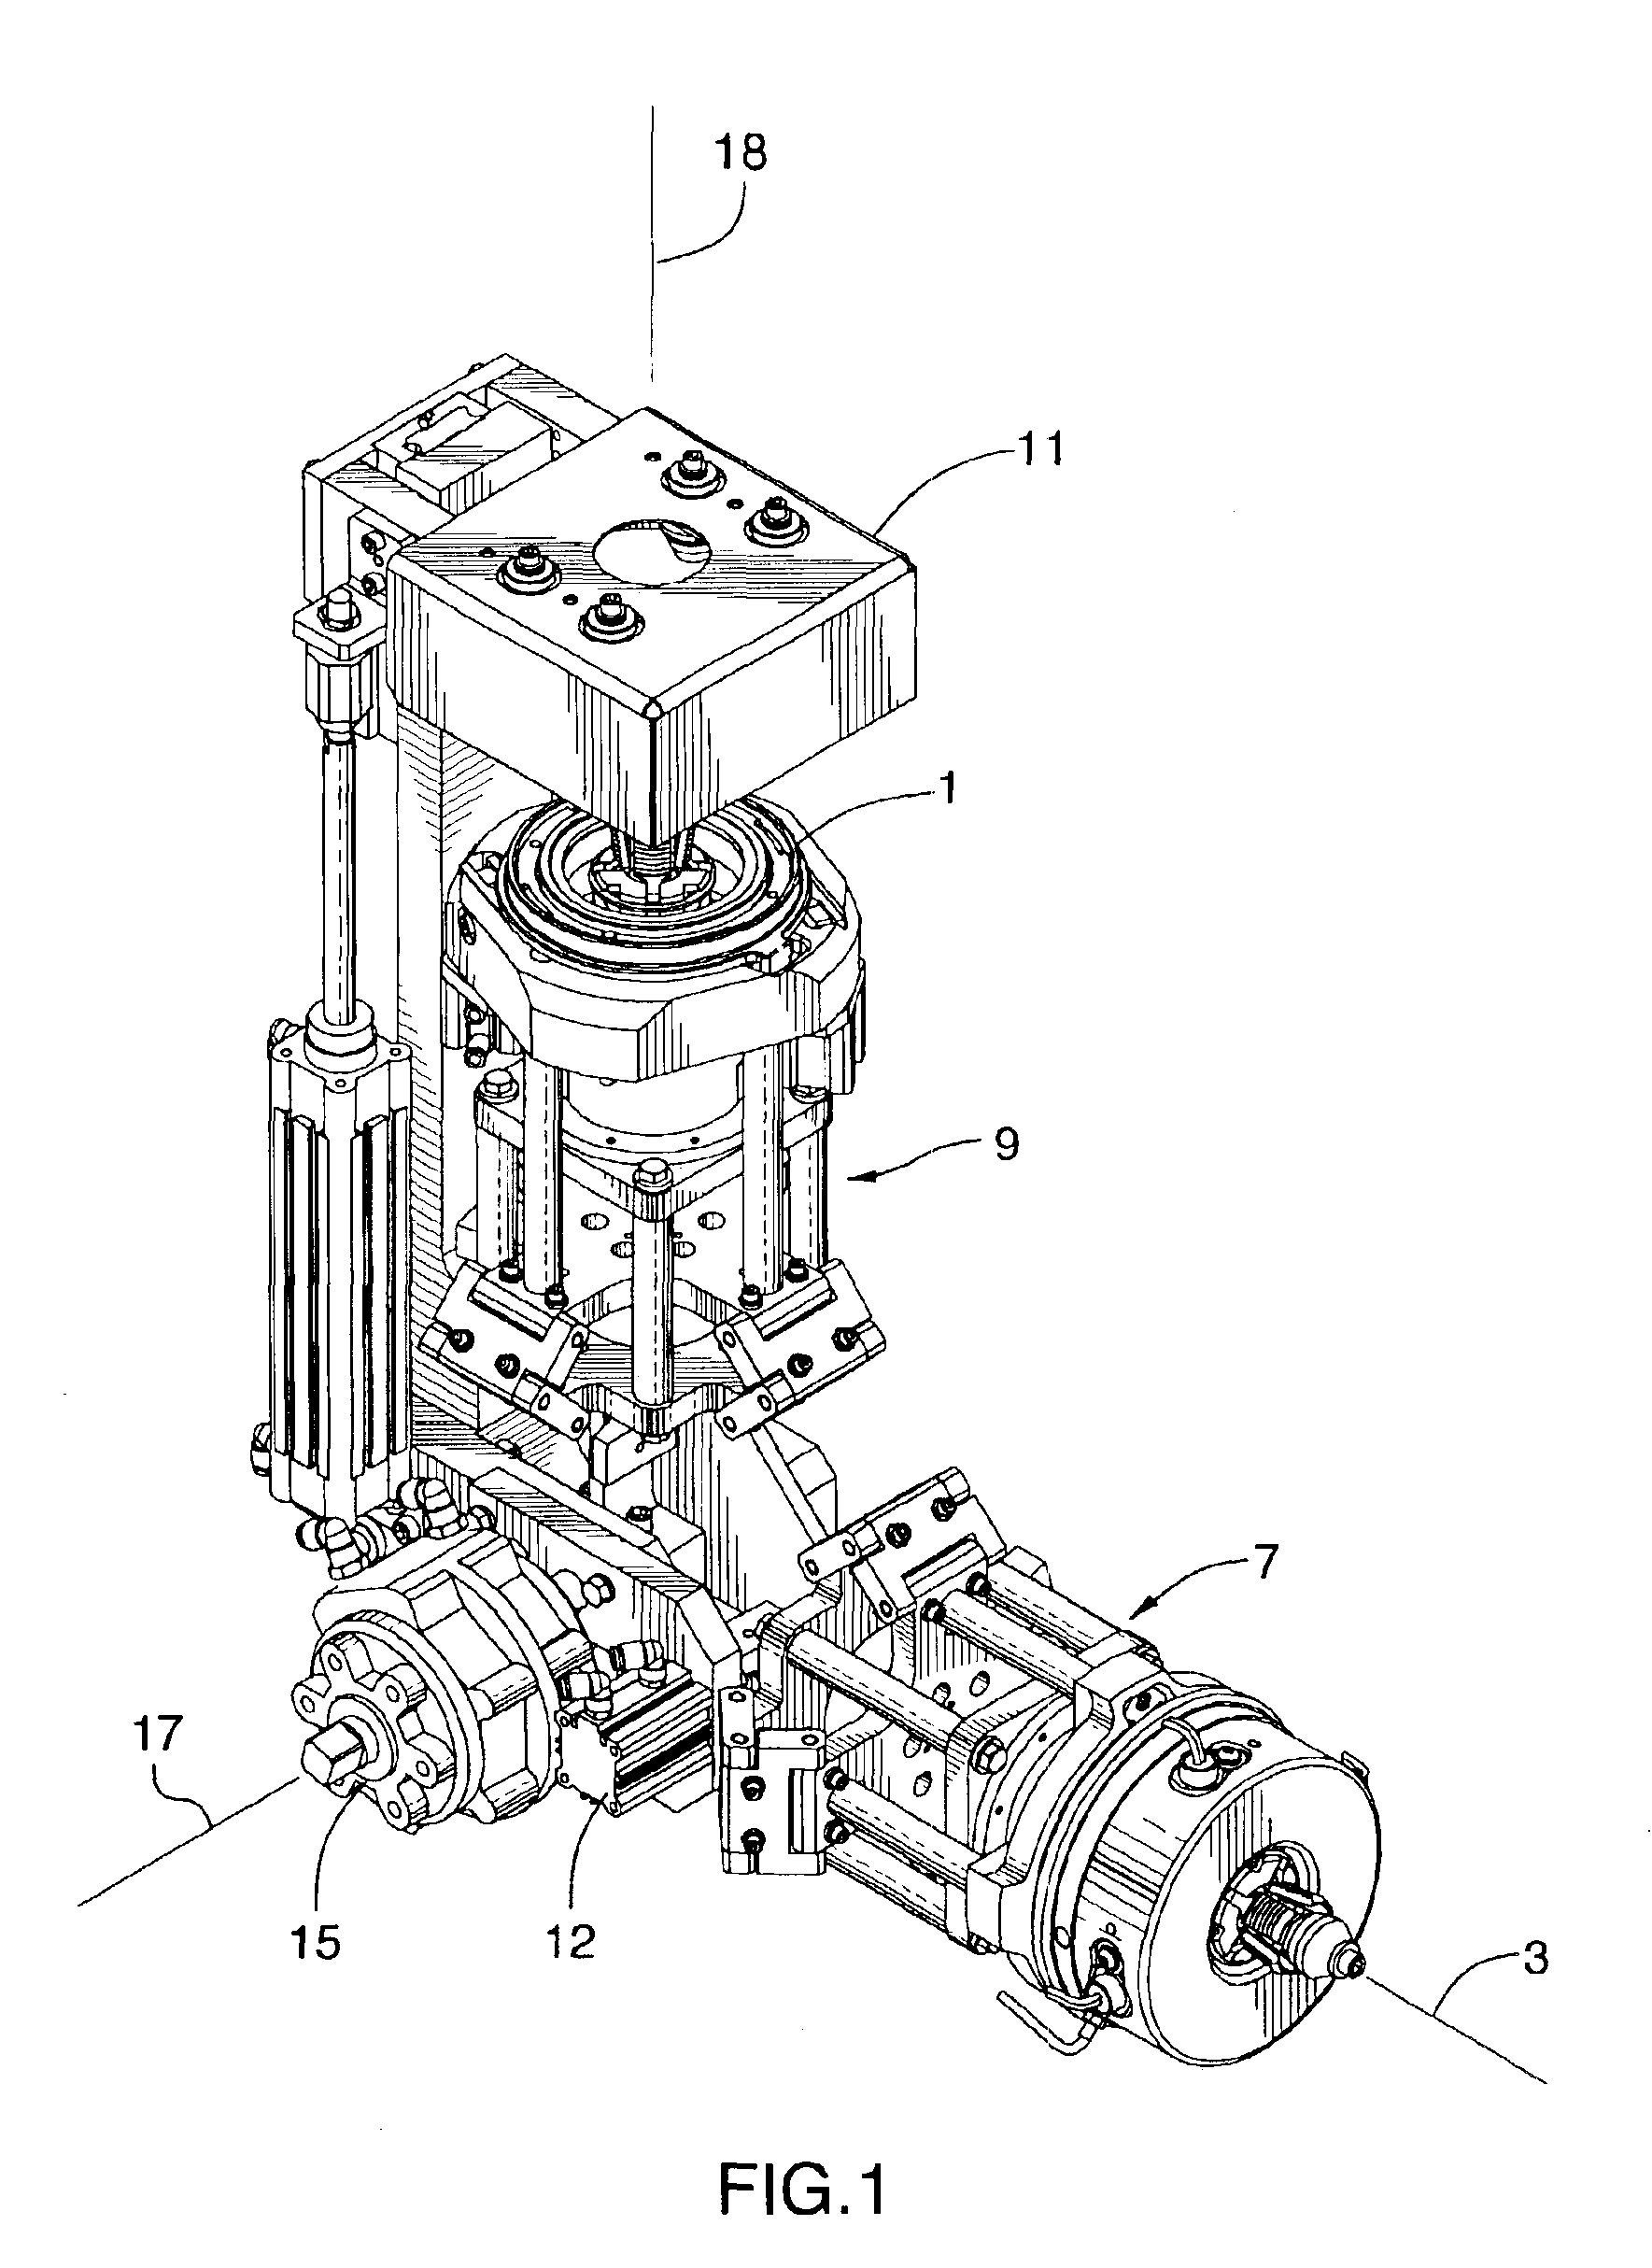 Combination tool with automated tool change for robot assisted assembly